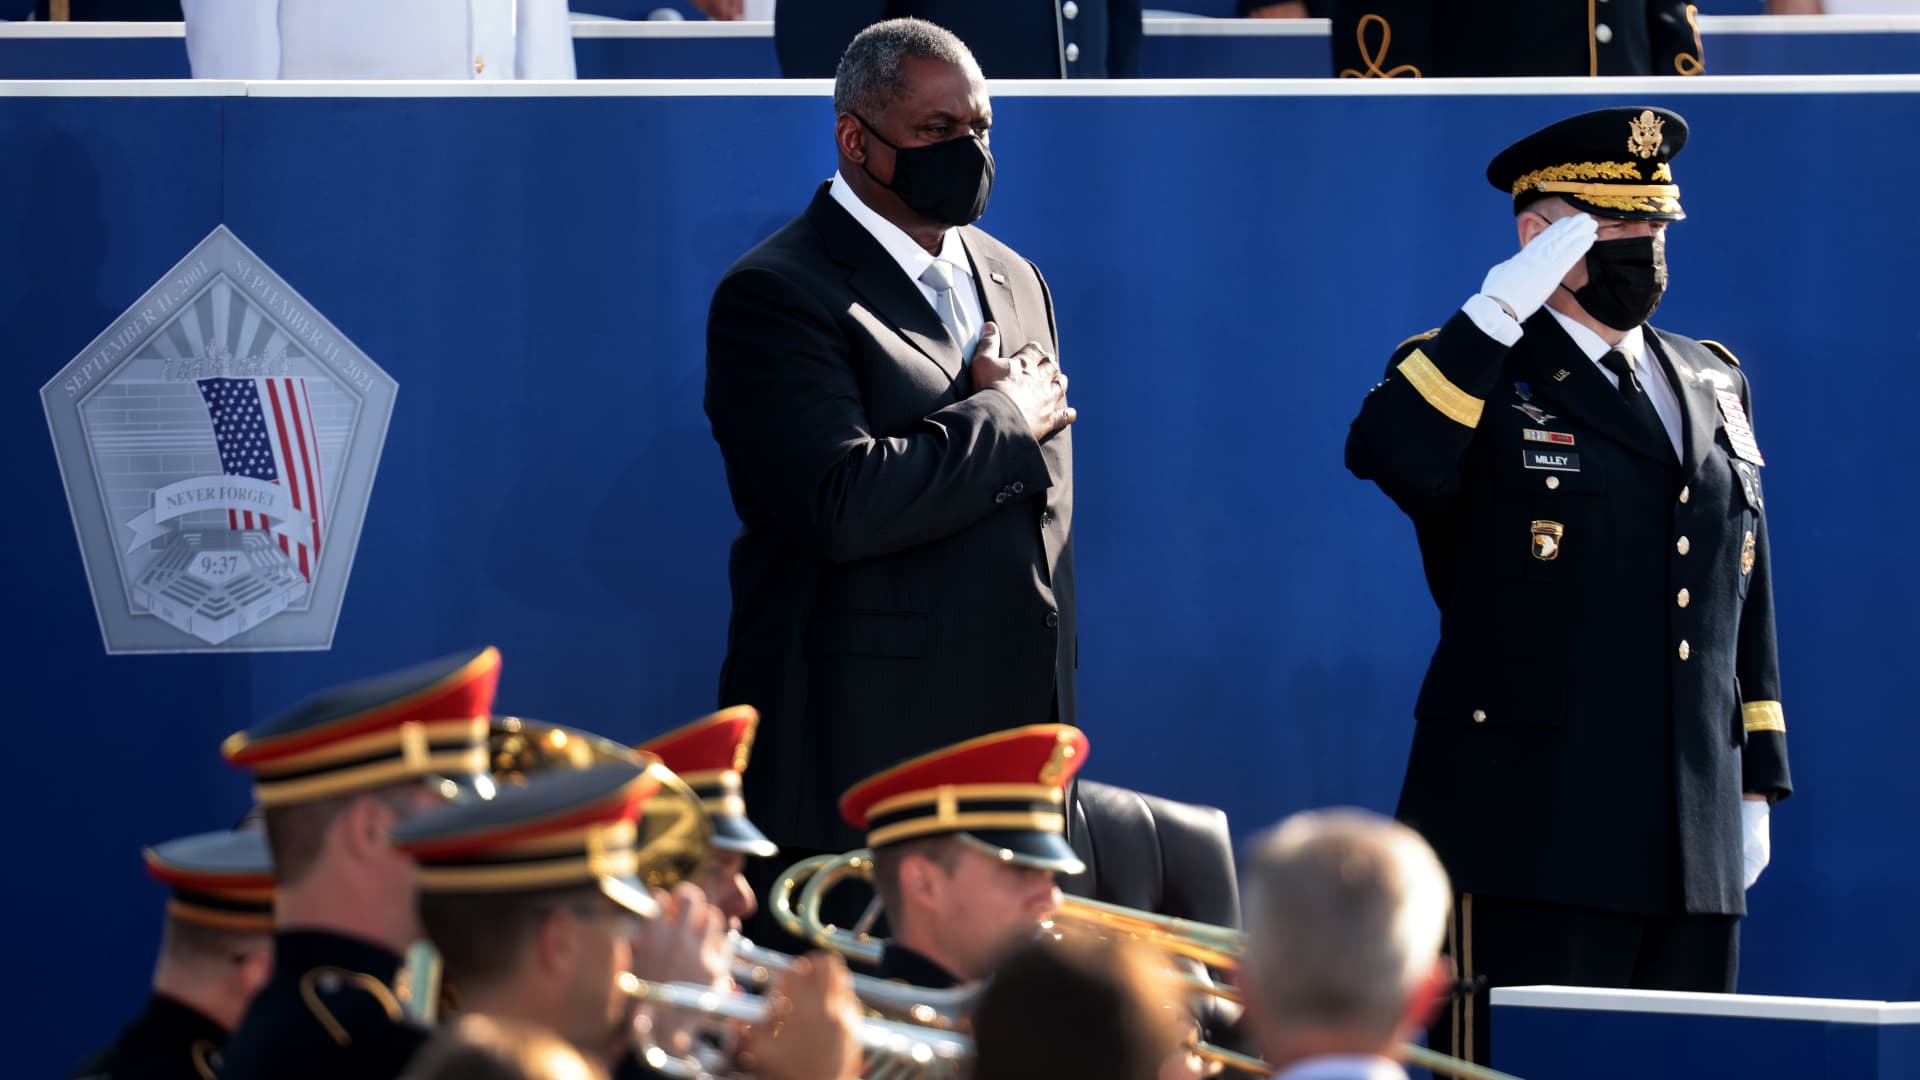 Secretary of Defense Lloyd Austin (L) and Chairman of the Joint Chiefs of Staff Gen. Mark A. Milley stand for the national anthem during the Pentagon 9/11 observance ceremony at the National 9/11 Pentagon Memorial on September 11, 2021 in Arlington, Virginia.